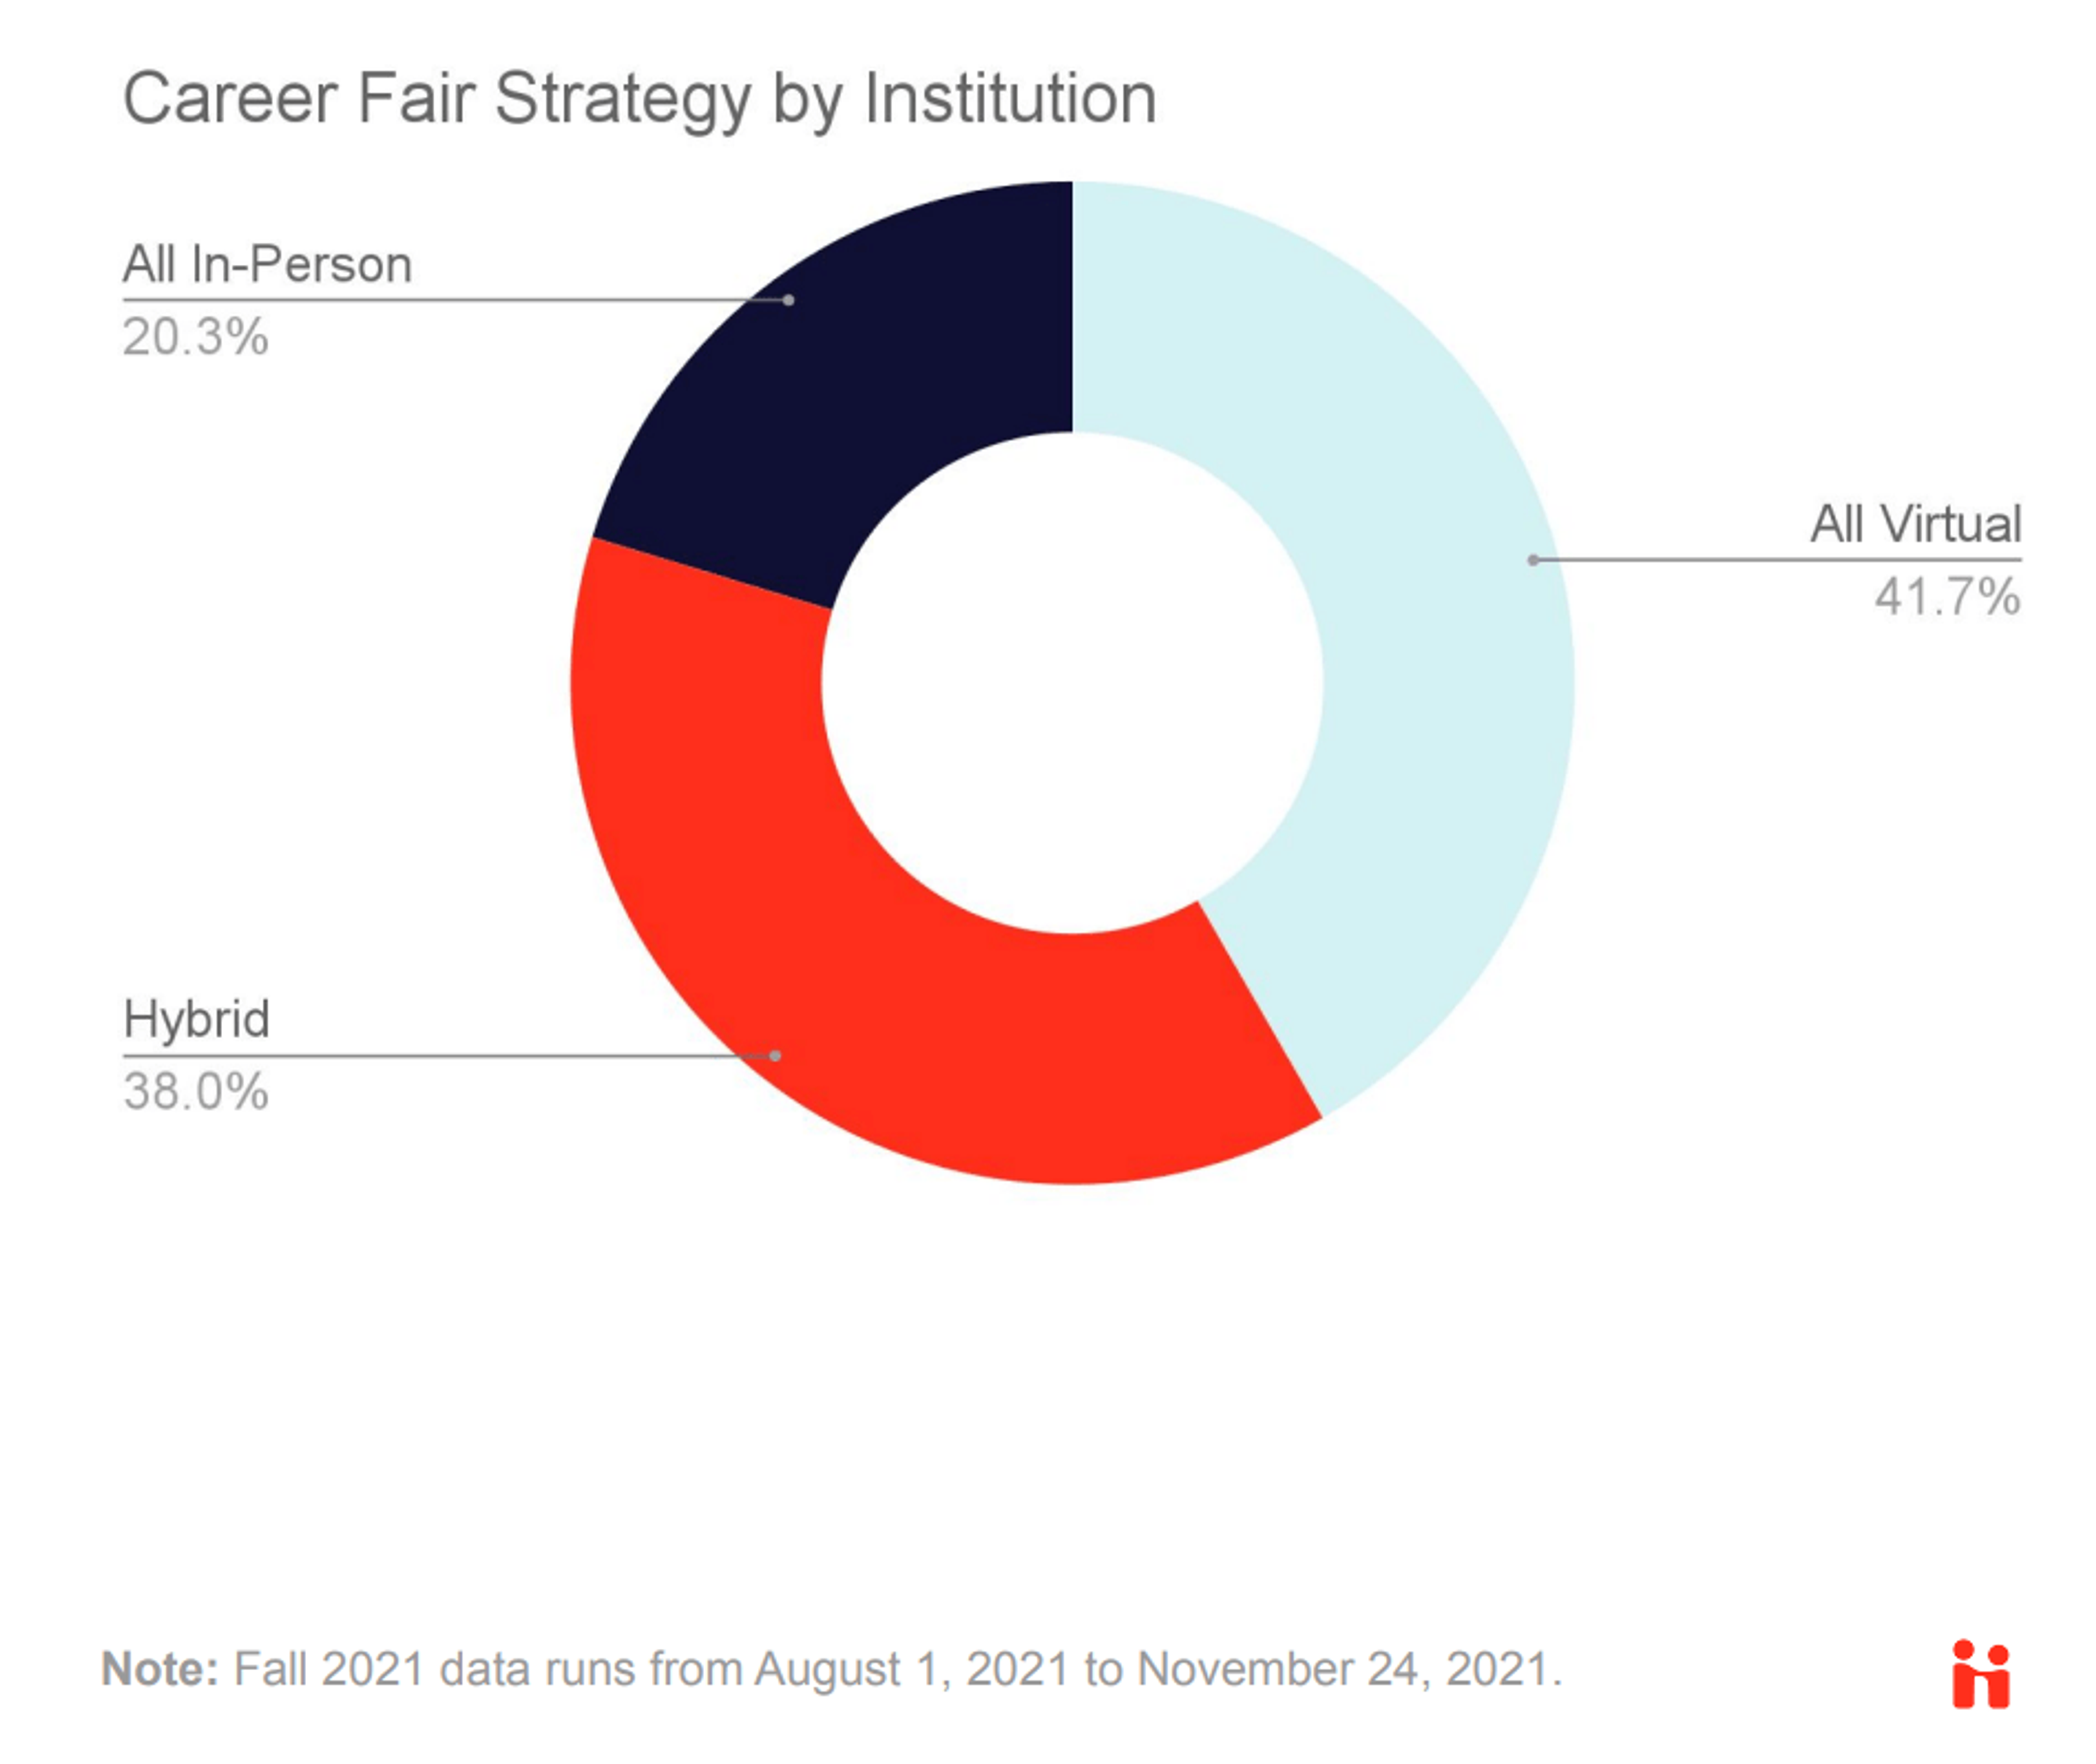 Career fair strategy by institution from August 1, 2021 to November 24, 2021.